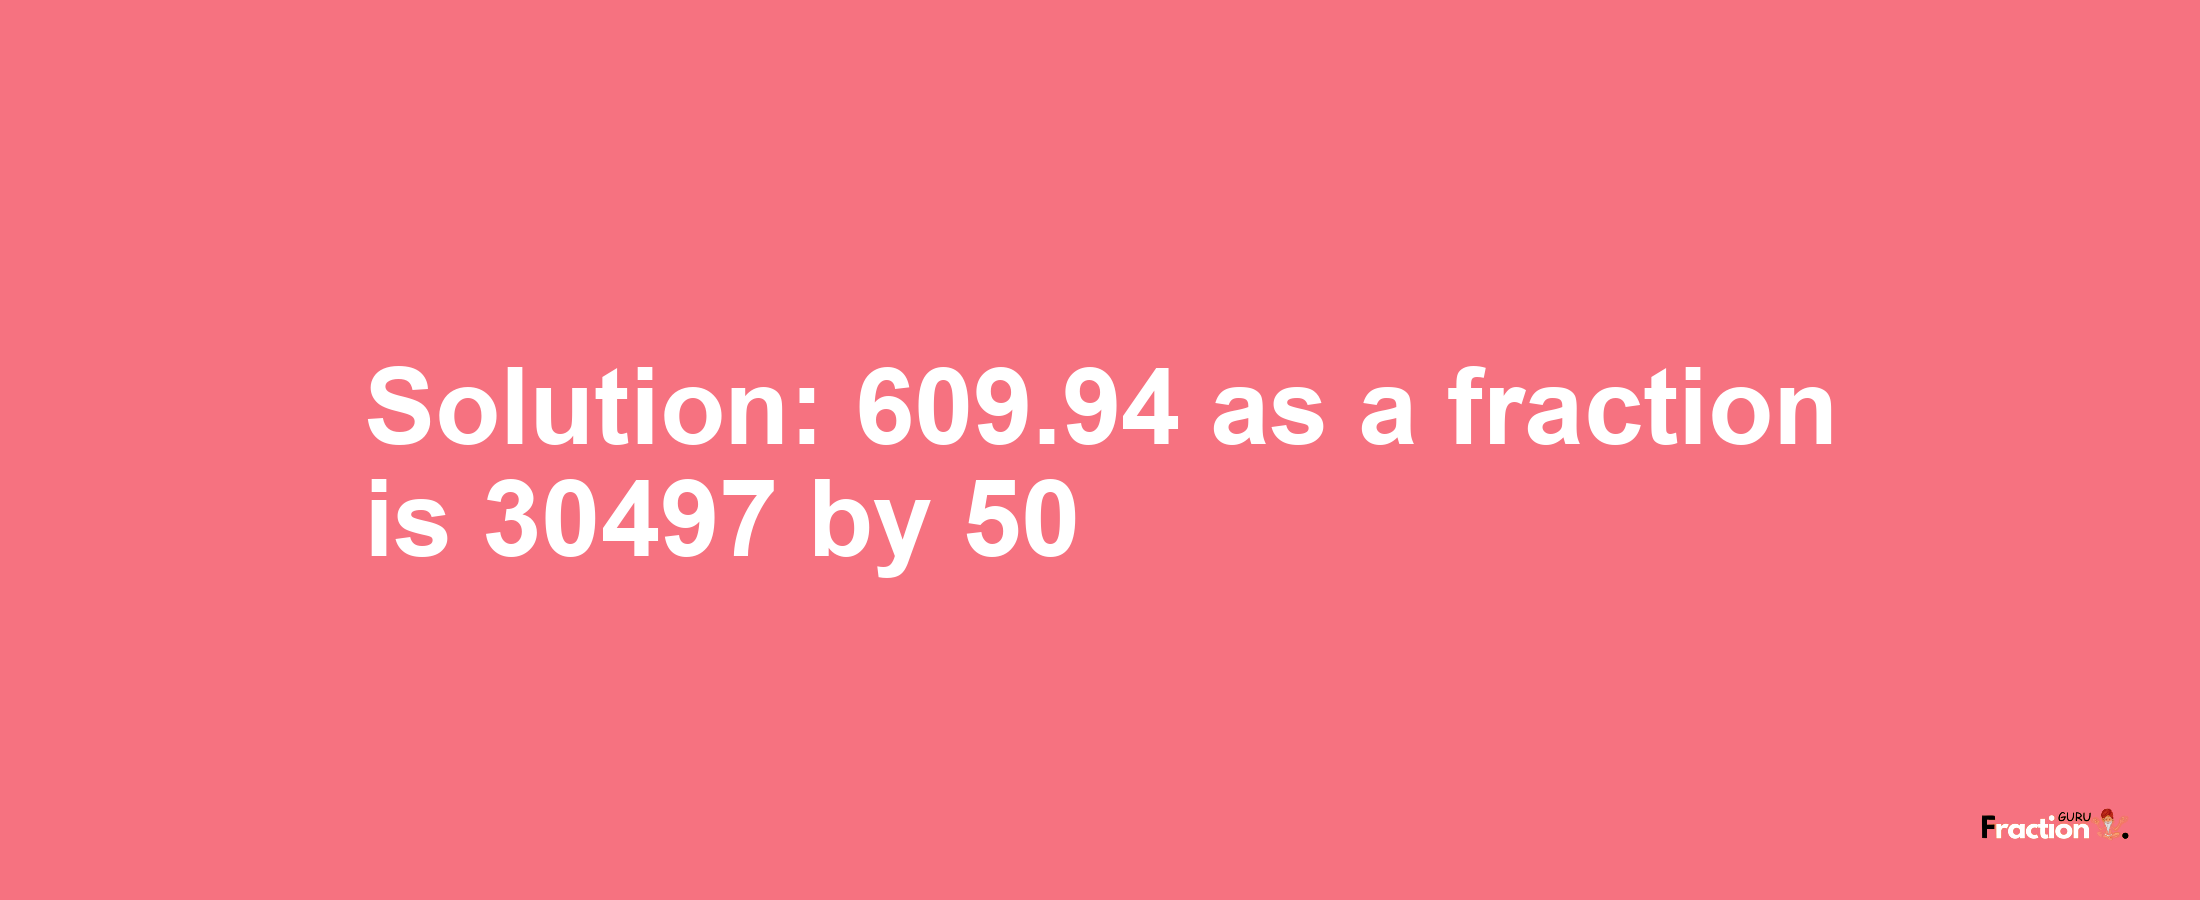 Solution:609.94 as a fraction is 30497/50